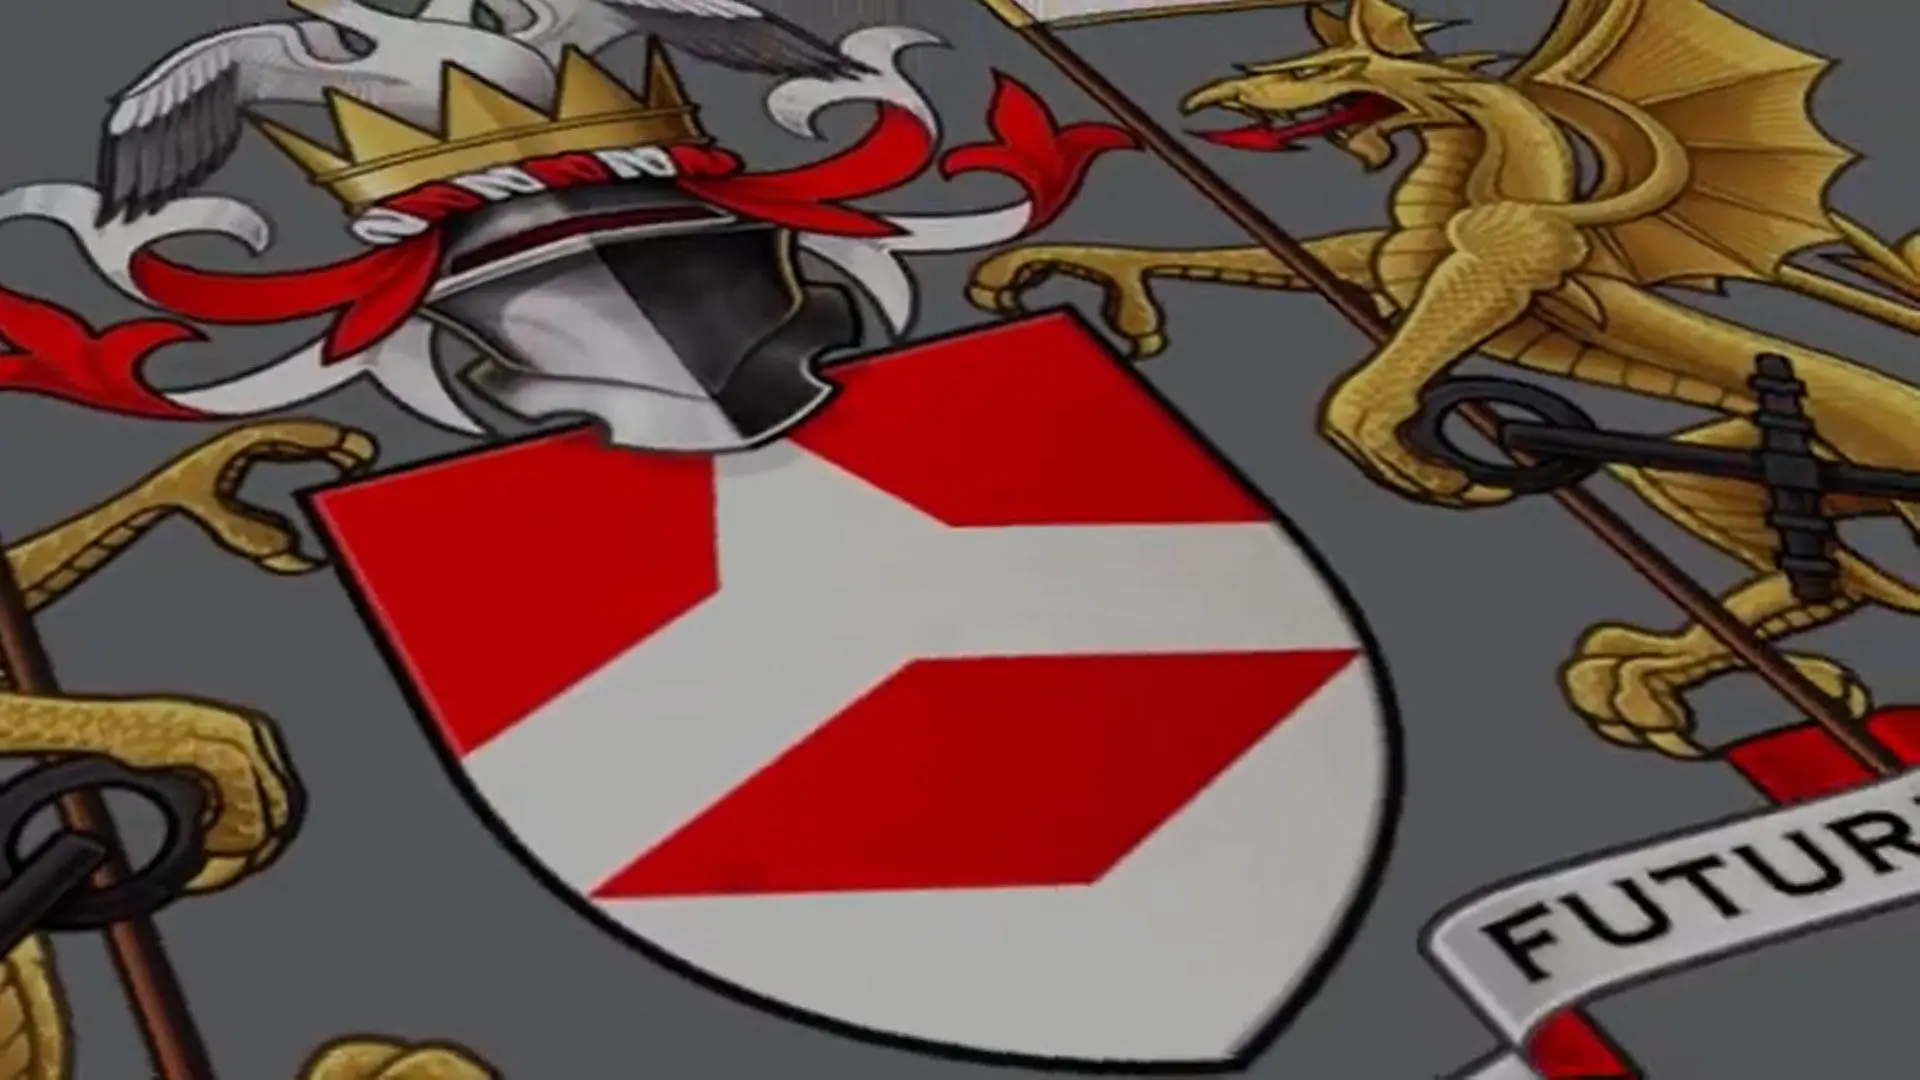 Close-up of Solent University's coat of arms